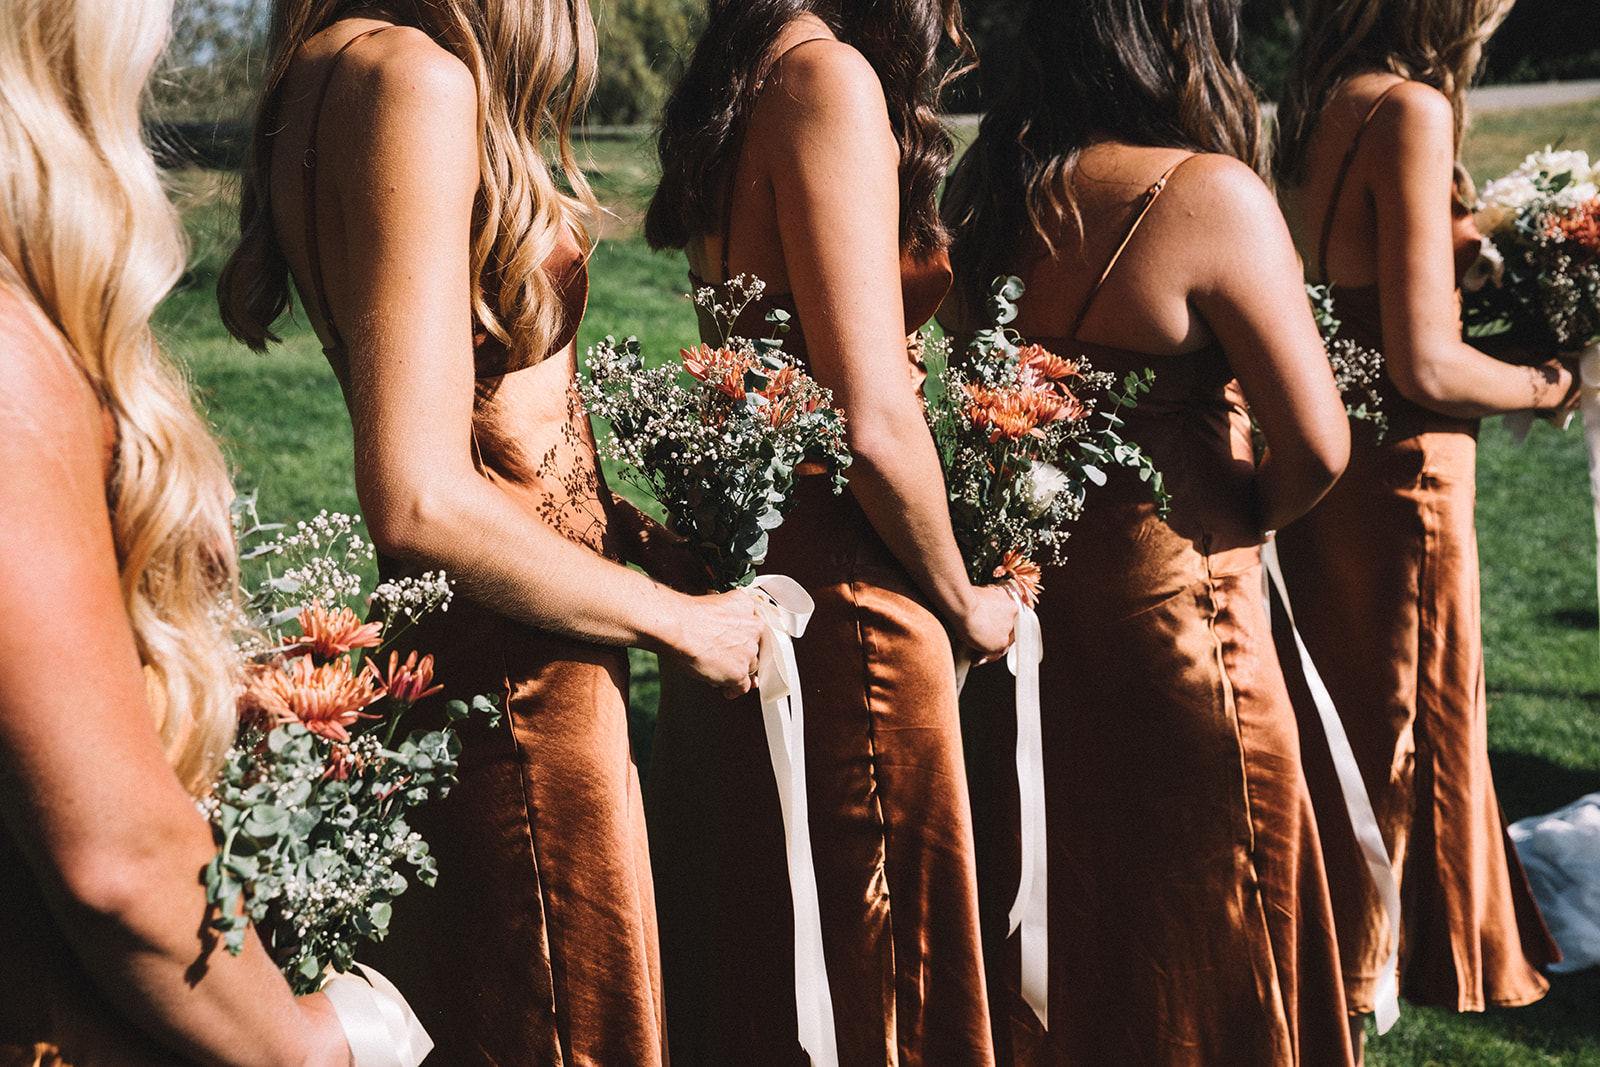 Beautiful summer wedding florals and bridal party dresses for this Santa Barbara Elings Park wedding ceremony.